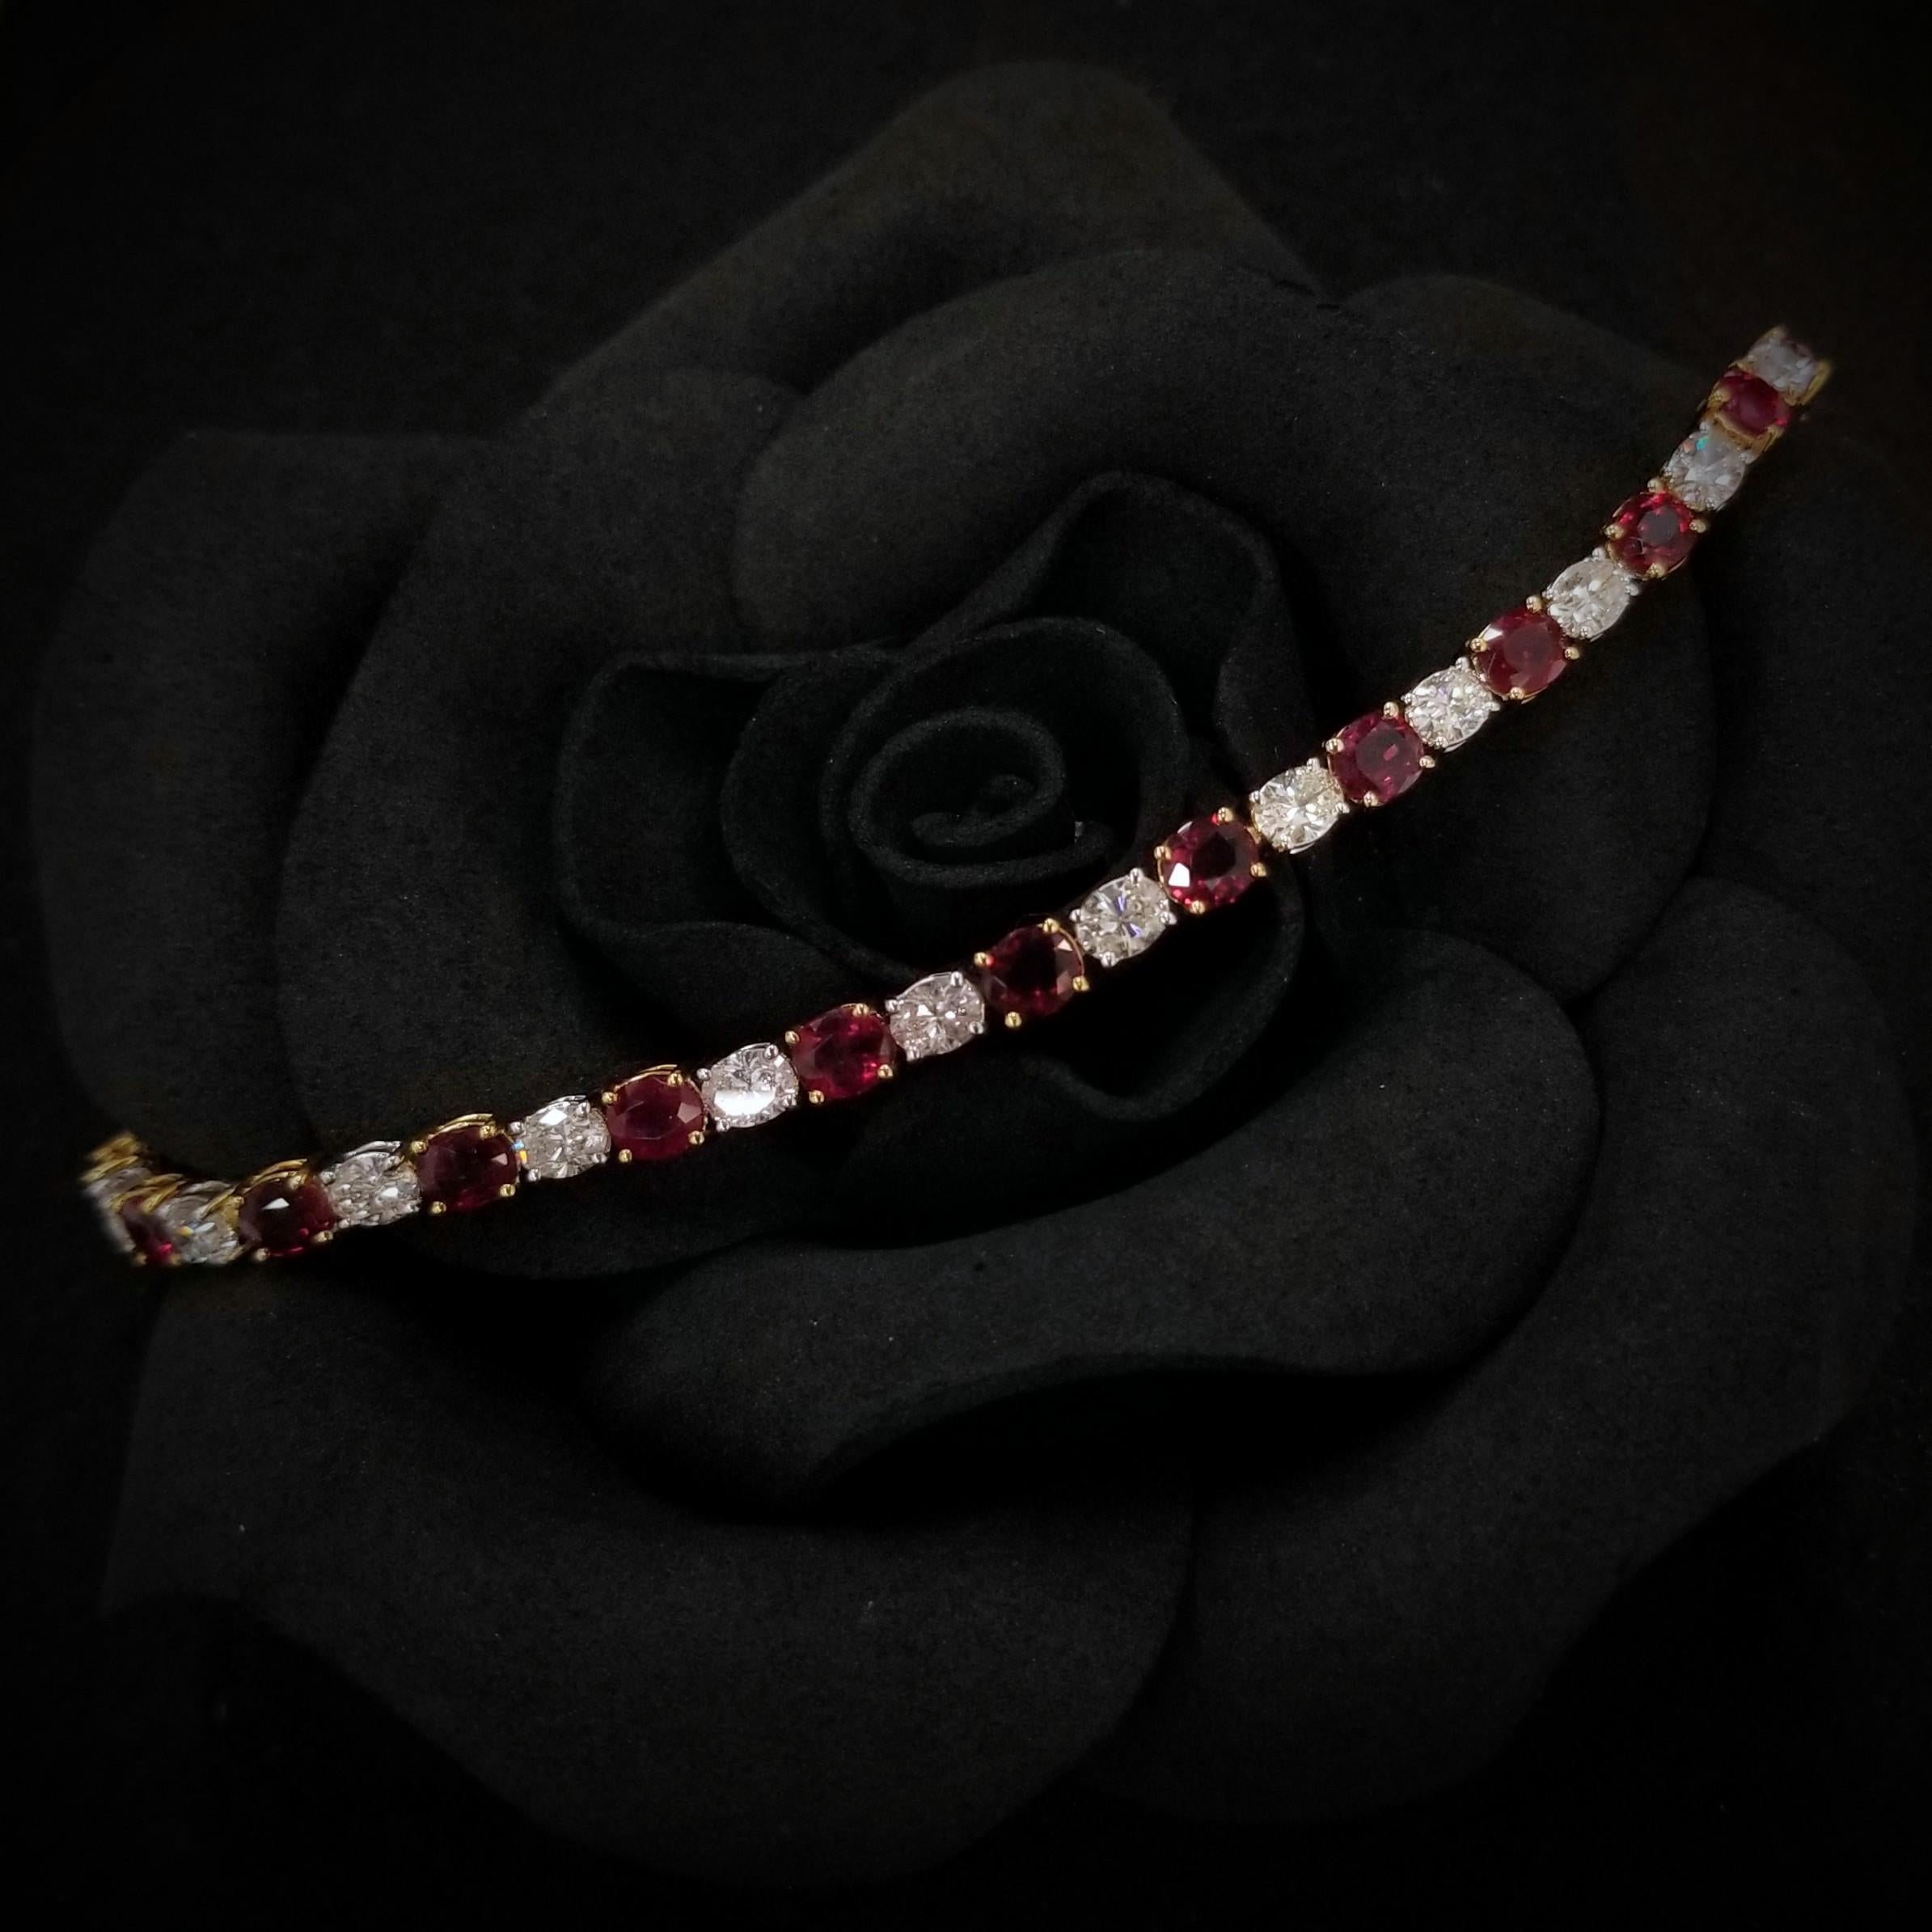 Presenting a stunning masterpiece, behold the IGI Certified Alternating 5.50 Ct Ruby & 3.85 Ct Diamond Bracelet in 18K Gold. This exquisite bracelet showcases the breathtaking combination of oval-shaped ruby and diamond gemstones, expertly set in a